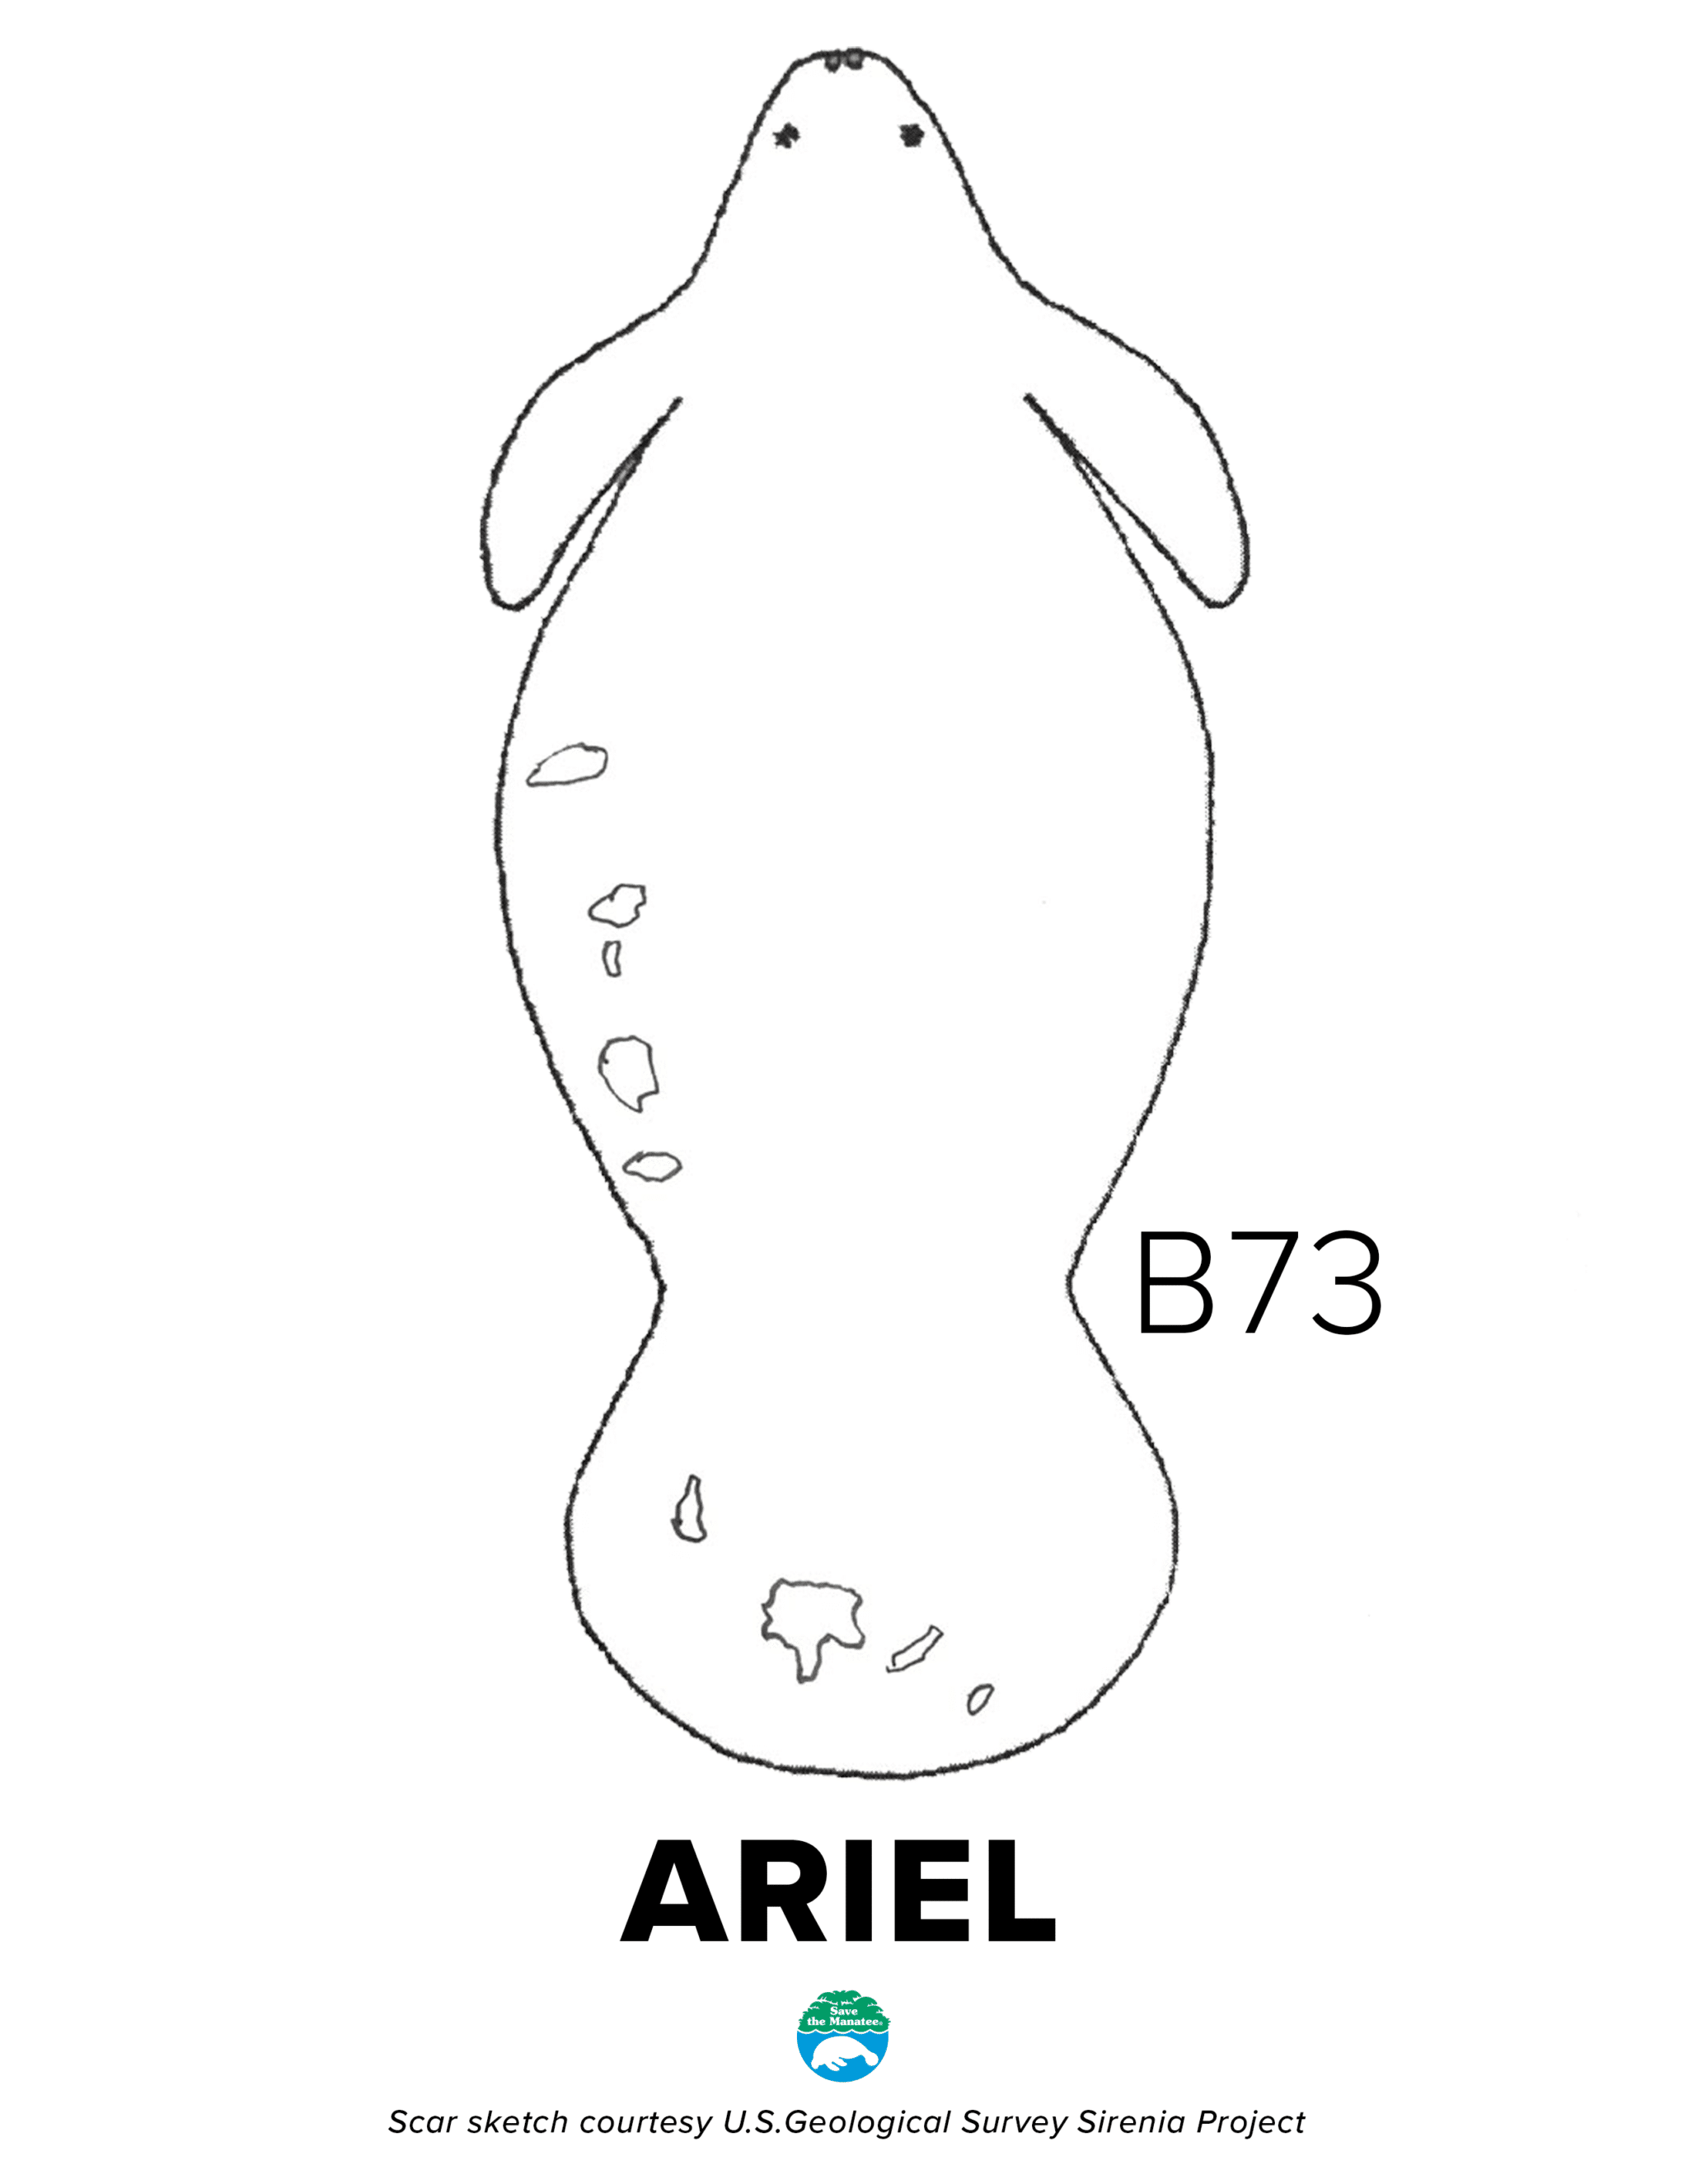 Ariel's scar chart, showing a few scars along the left side of her body and her tail.